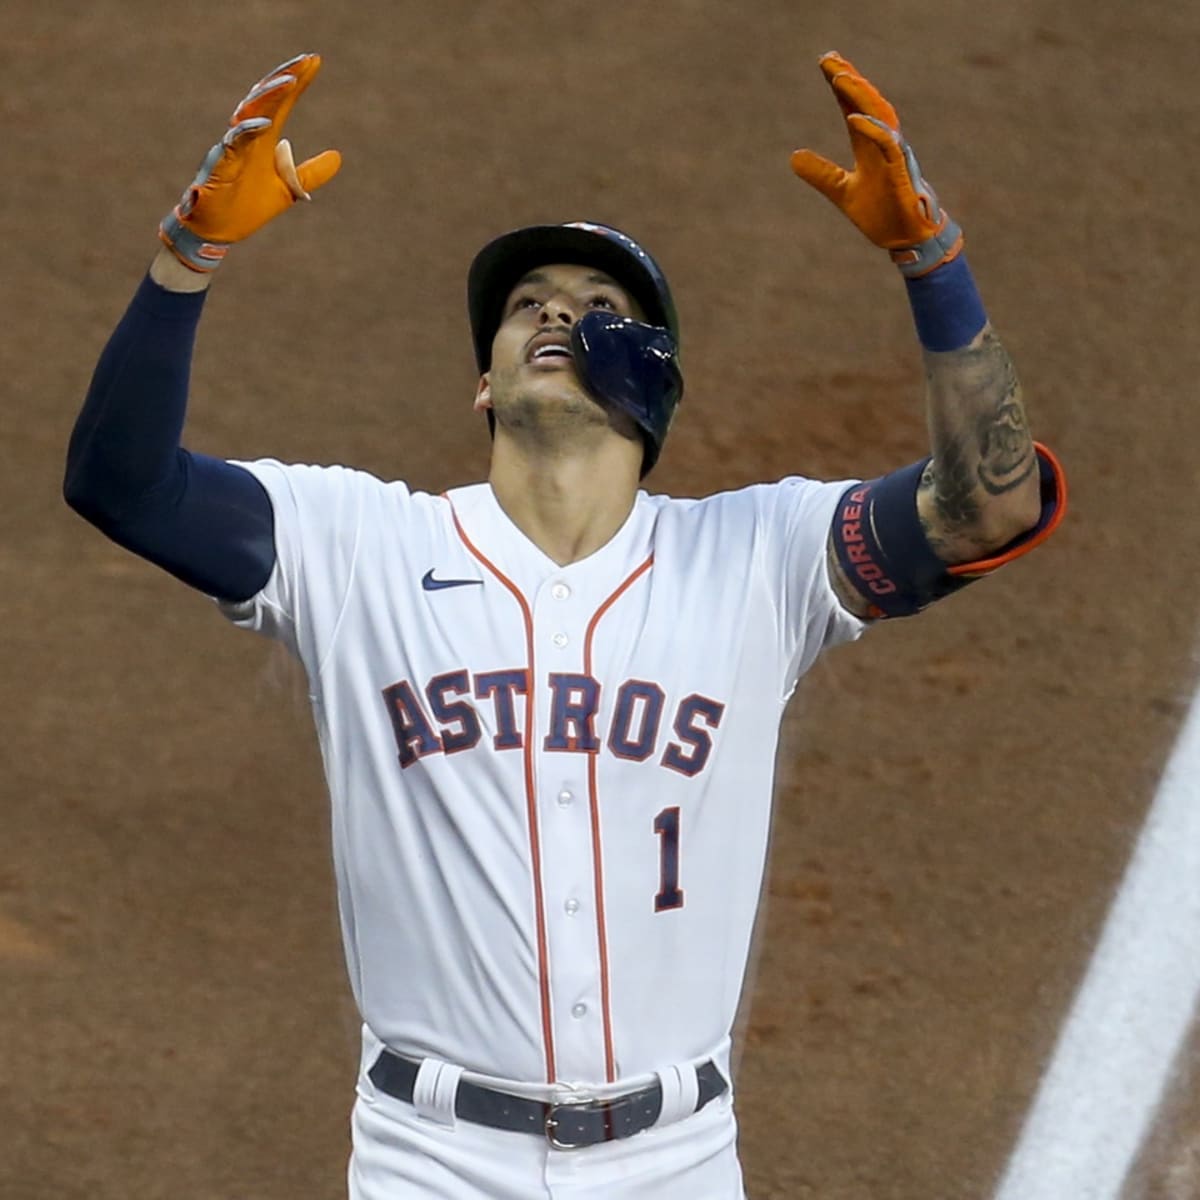 Mets swoop in for massive contract with Carlos Correa after Giants deal  falls through